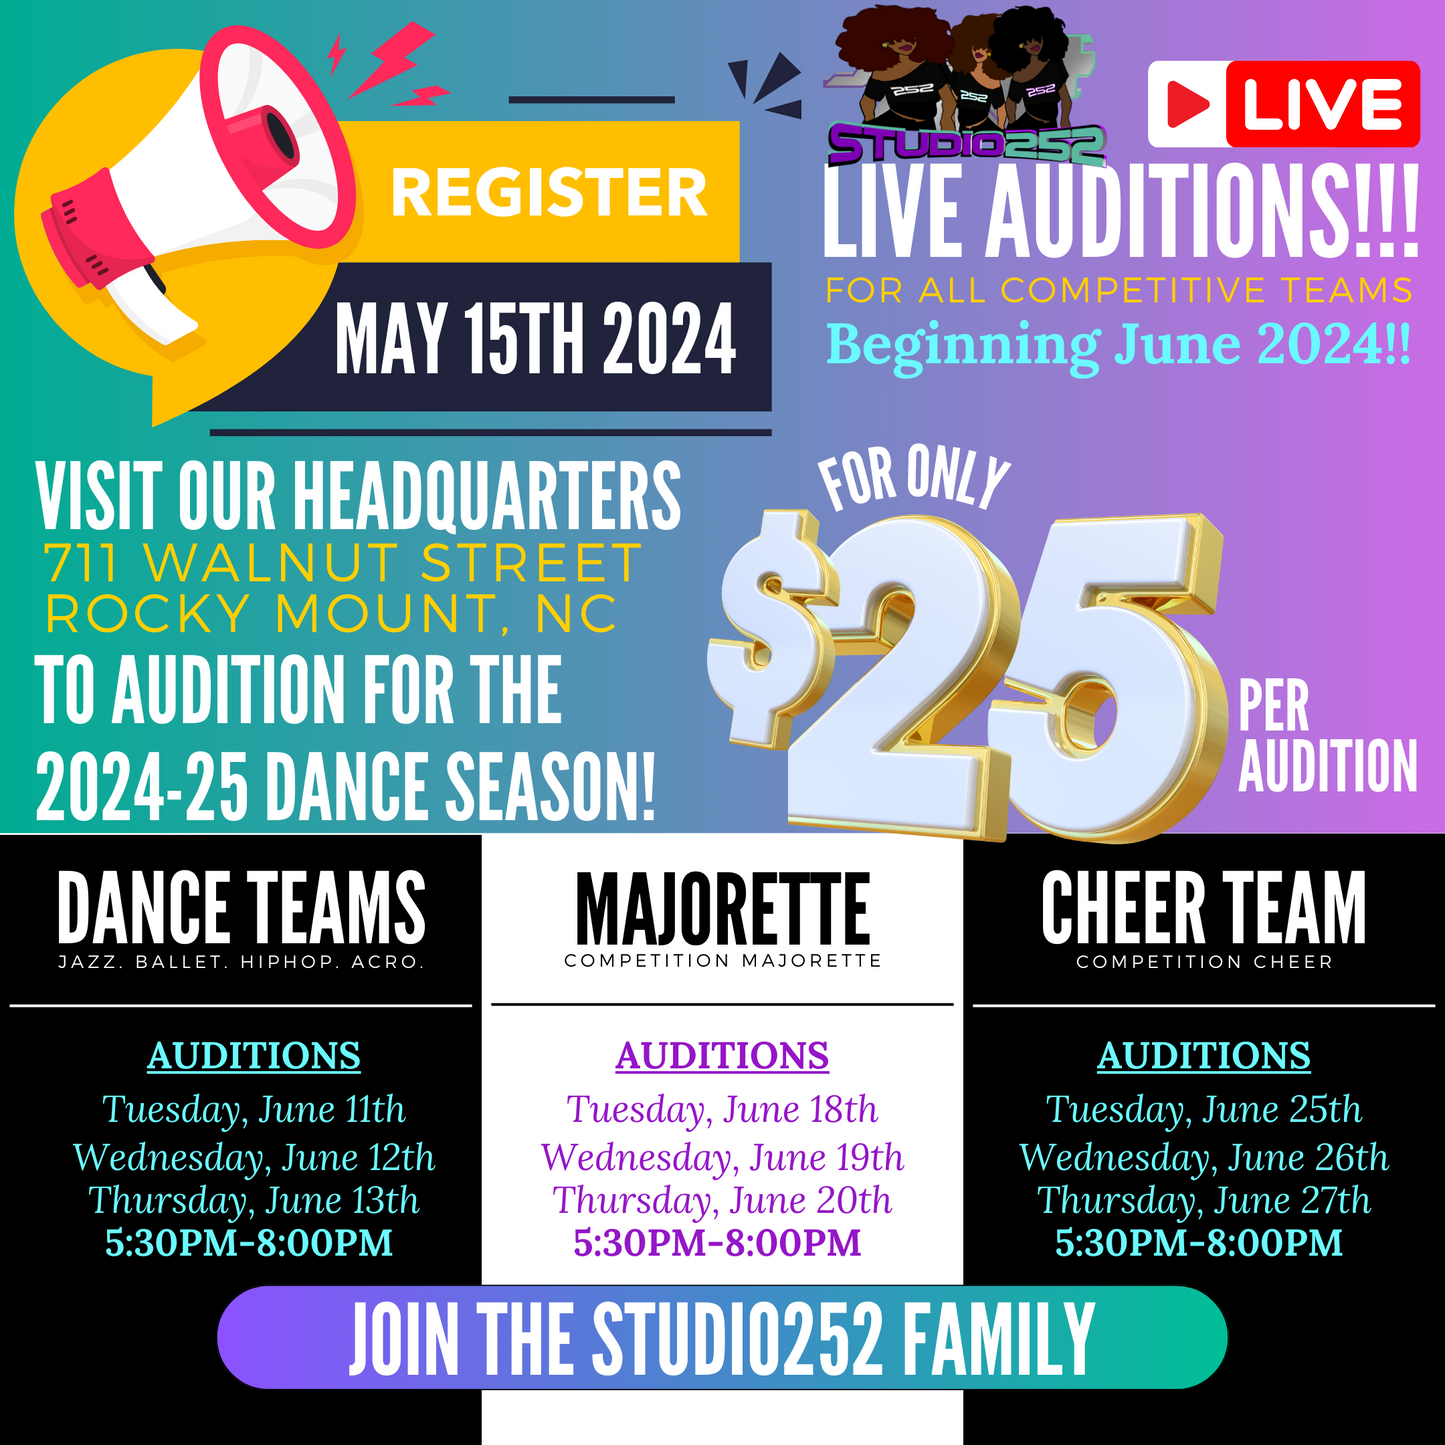 2024-25 Audition Fees